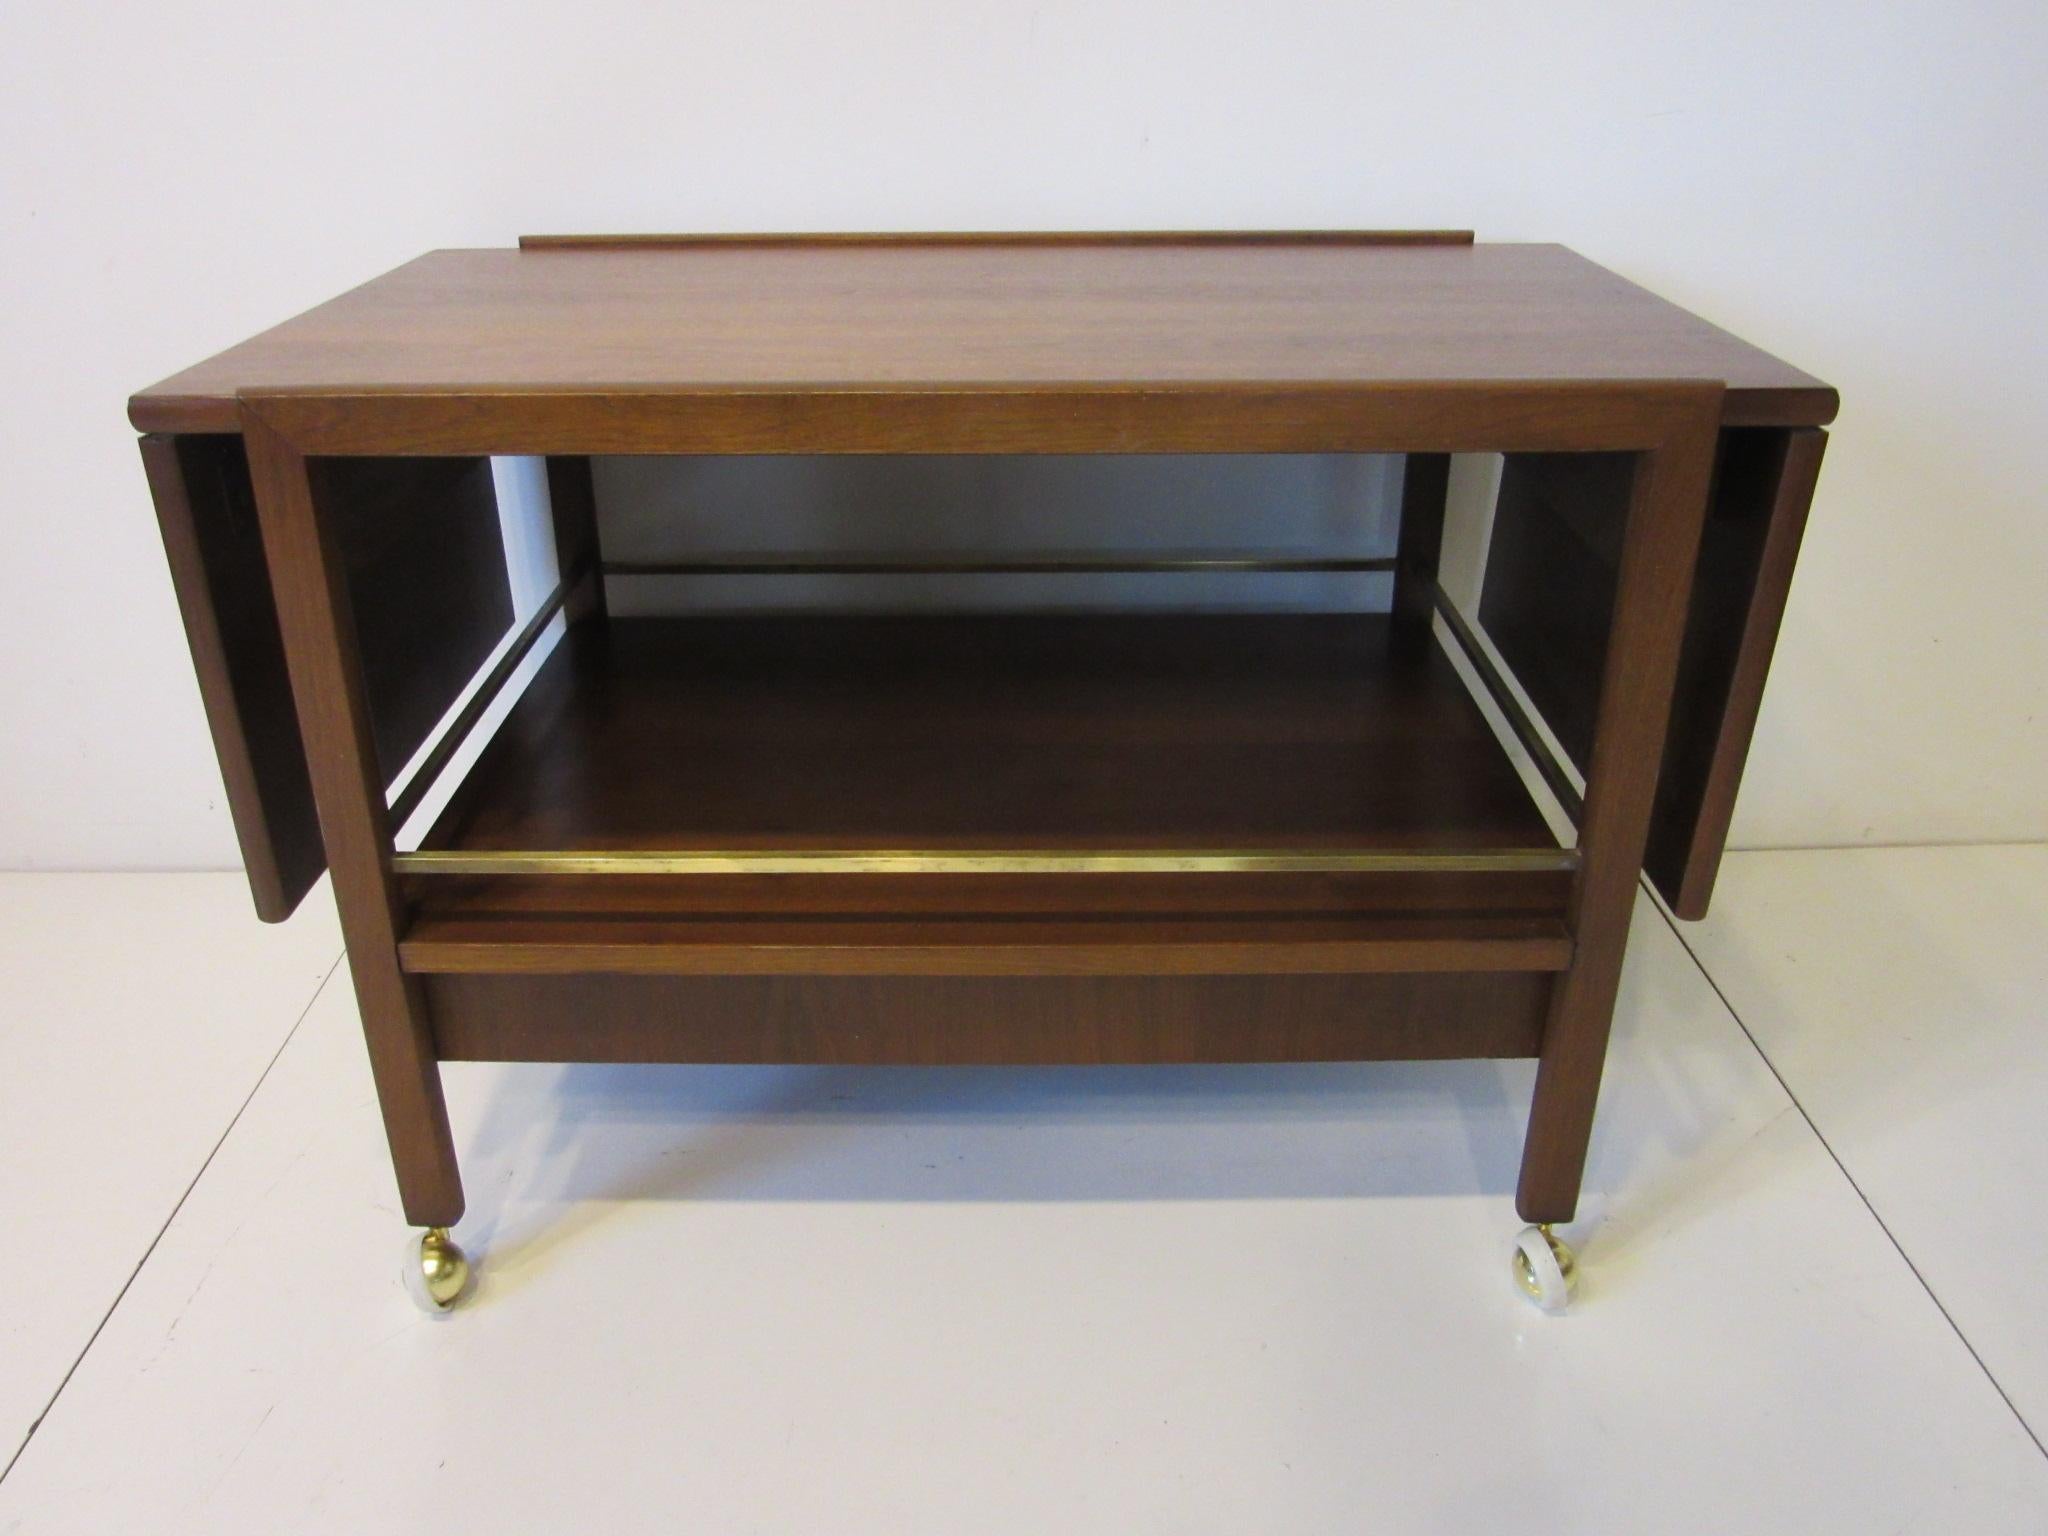 A medium toned walnut rolling bar / entertainment or TV cart with folding top and lower storage area with drawer. Detailed with brass rails and wheels this piece can be used in many ways, well crafted and well finished. Measurements when fully